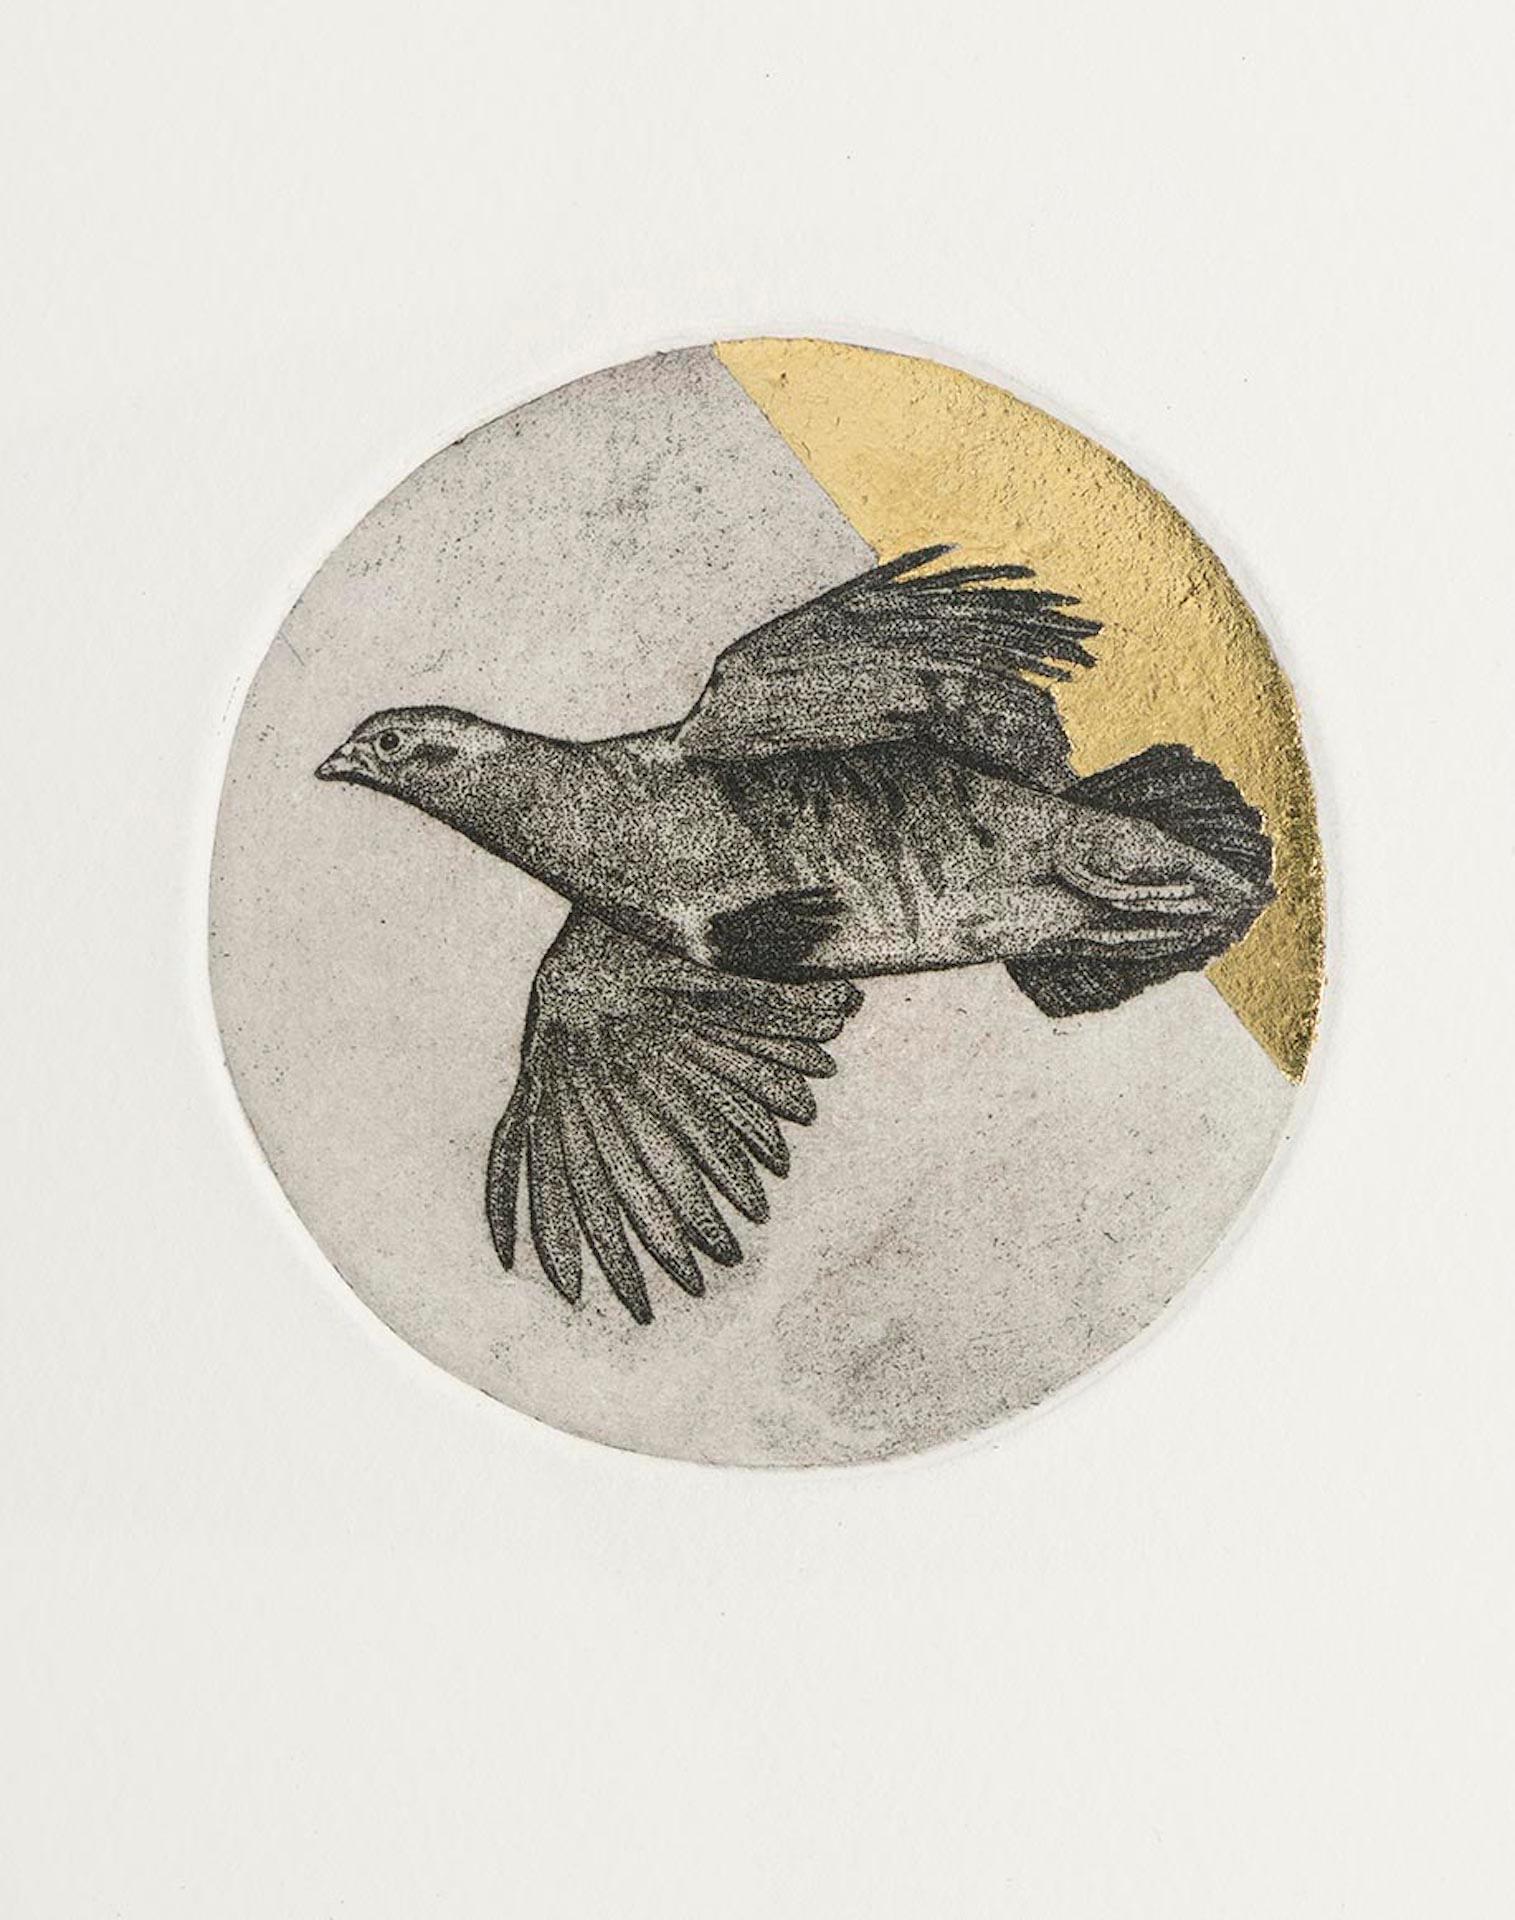 Partridge Study by Artist, Guy Allen.
An etching, aquatint and hand finished gold leaf on 300gsm Somerset paper.
Edition Size: 75
Year Completed: 2017
Image Size: 8.5 x 8 cm
Paper Size: 56 x 39 cm
Sold Unframed
(Please note that in situ images are